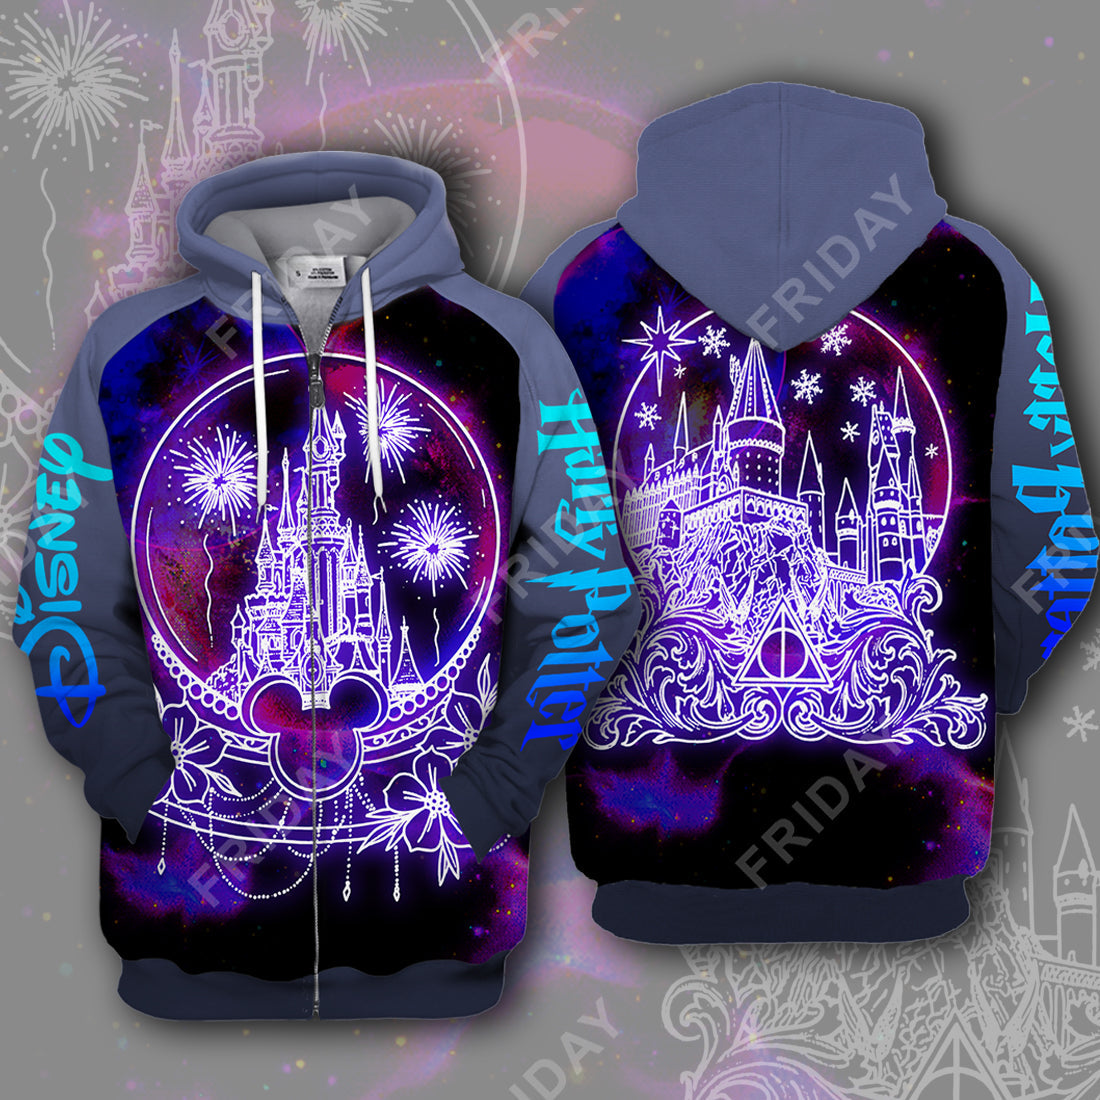 Unifinz DN HP T-shirt DN and HP Castle In Glass Sphere 3D Print T-shirt Amazing High Quality  DN HP Hoodie Sweater Tank  2022